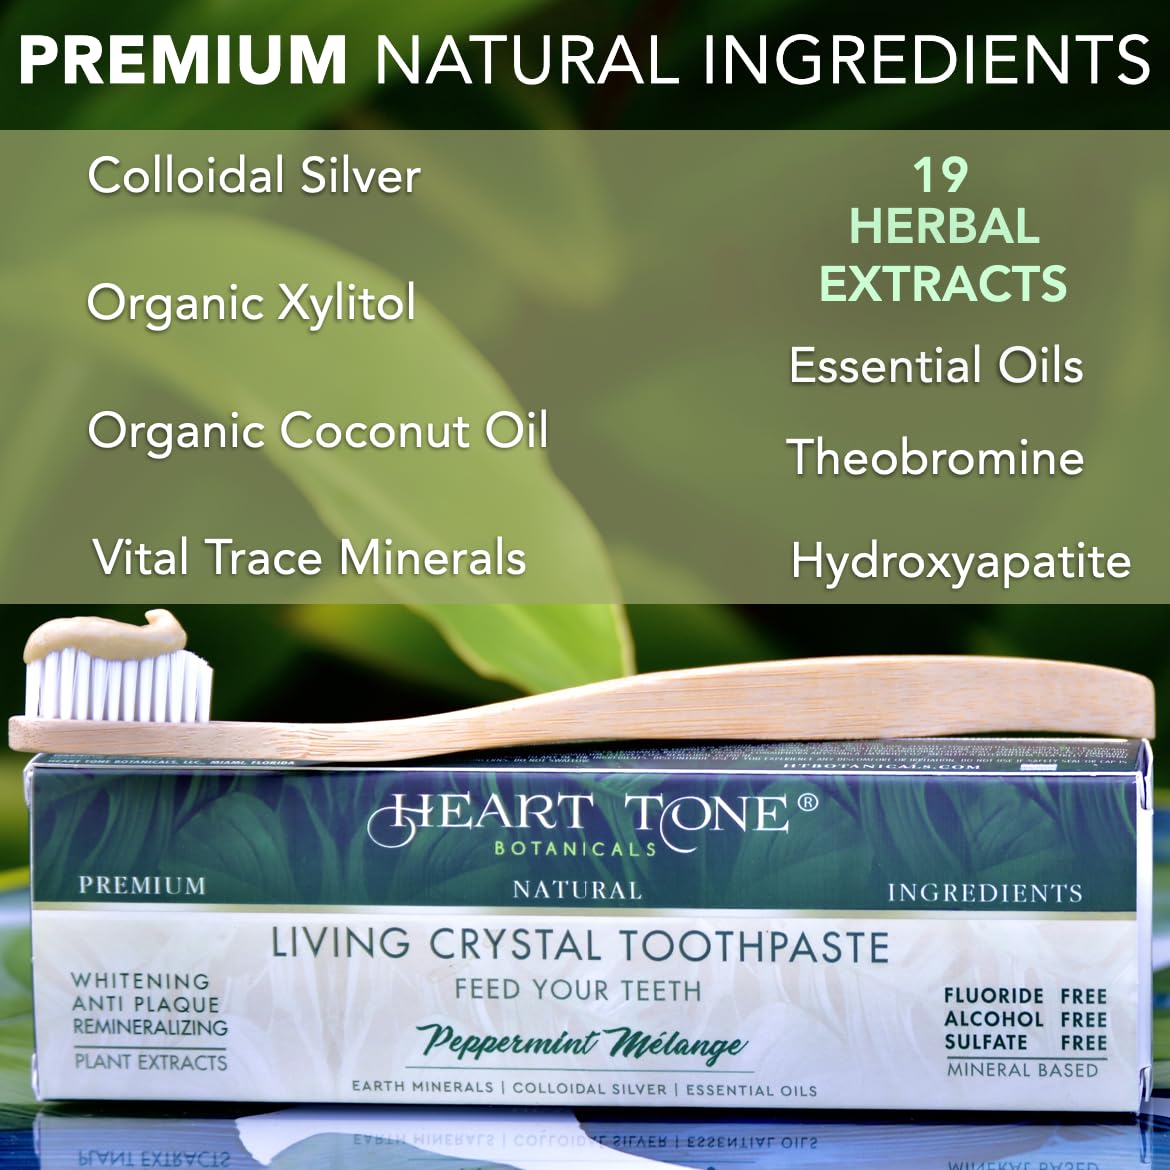 Heart Tone Botanicals Living Crystal Toothpaste | Fluoride Free | Natural & Remineralizing Hydroxyapatite Toothpaste | Sensitive Teeth | Colloidal Silver, Theobromine, Strengthens Enamel | Minty Fresh